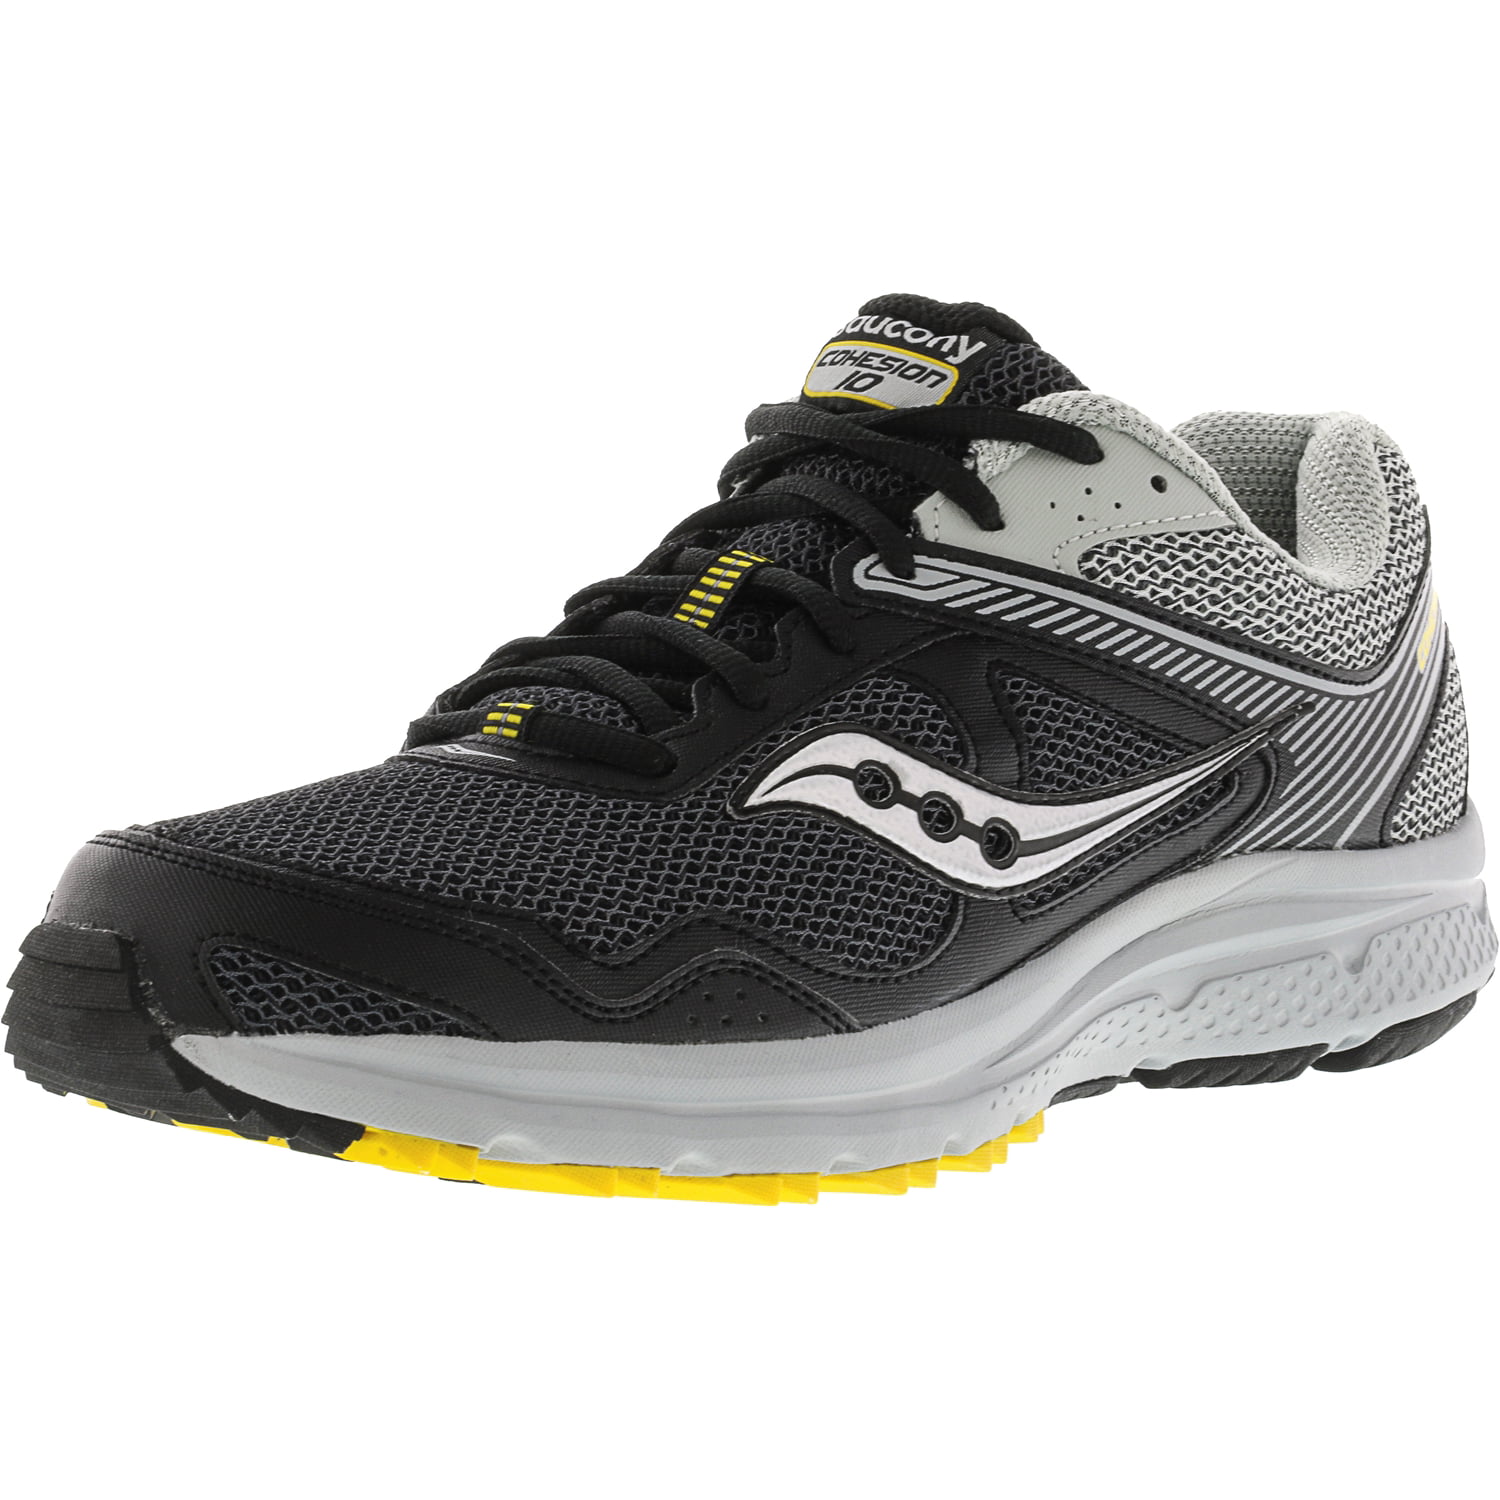 New Saucony Cohesion TR10 Mens Trail Running Shoe/ S25339-1 Black-Gray-Yellow 